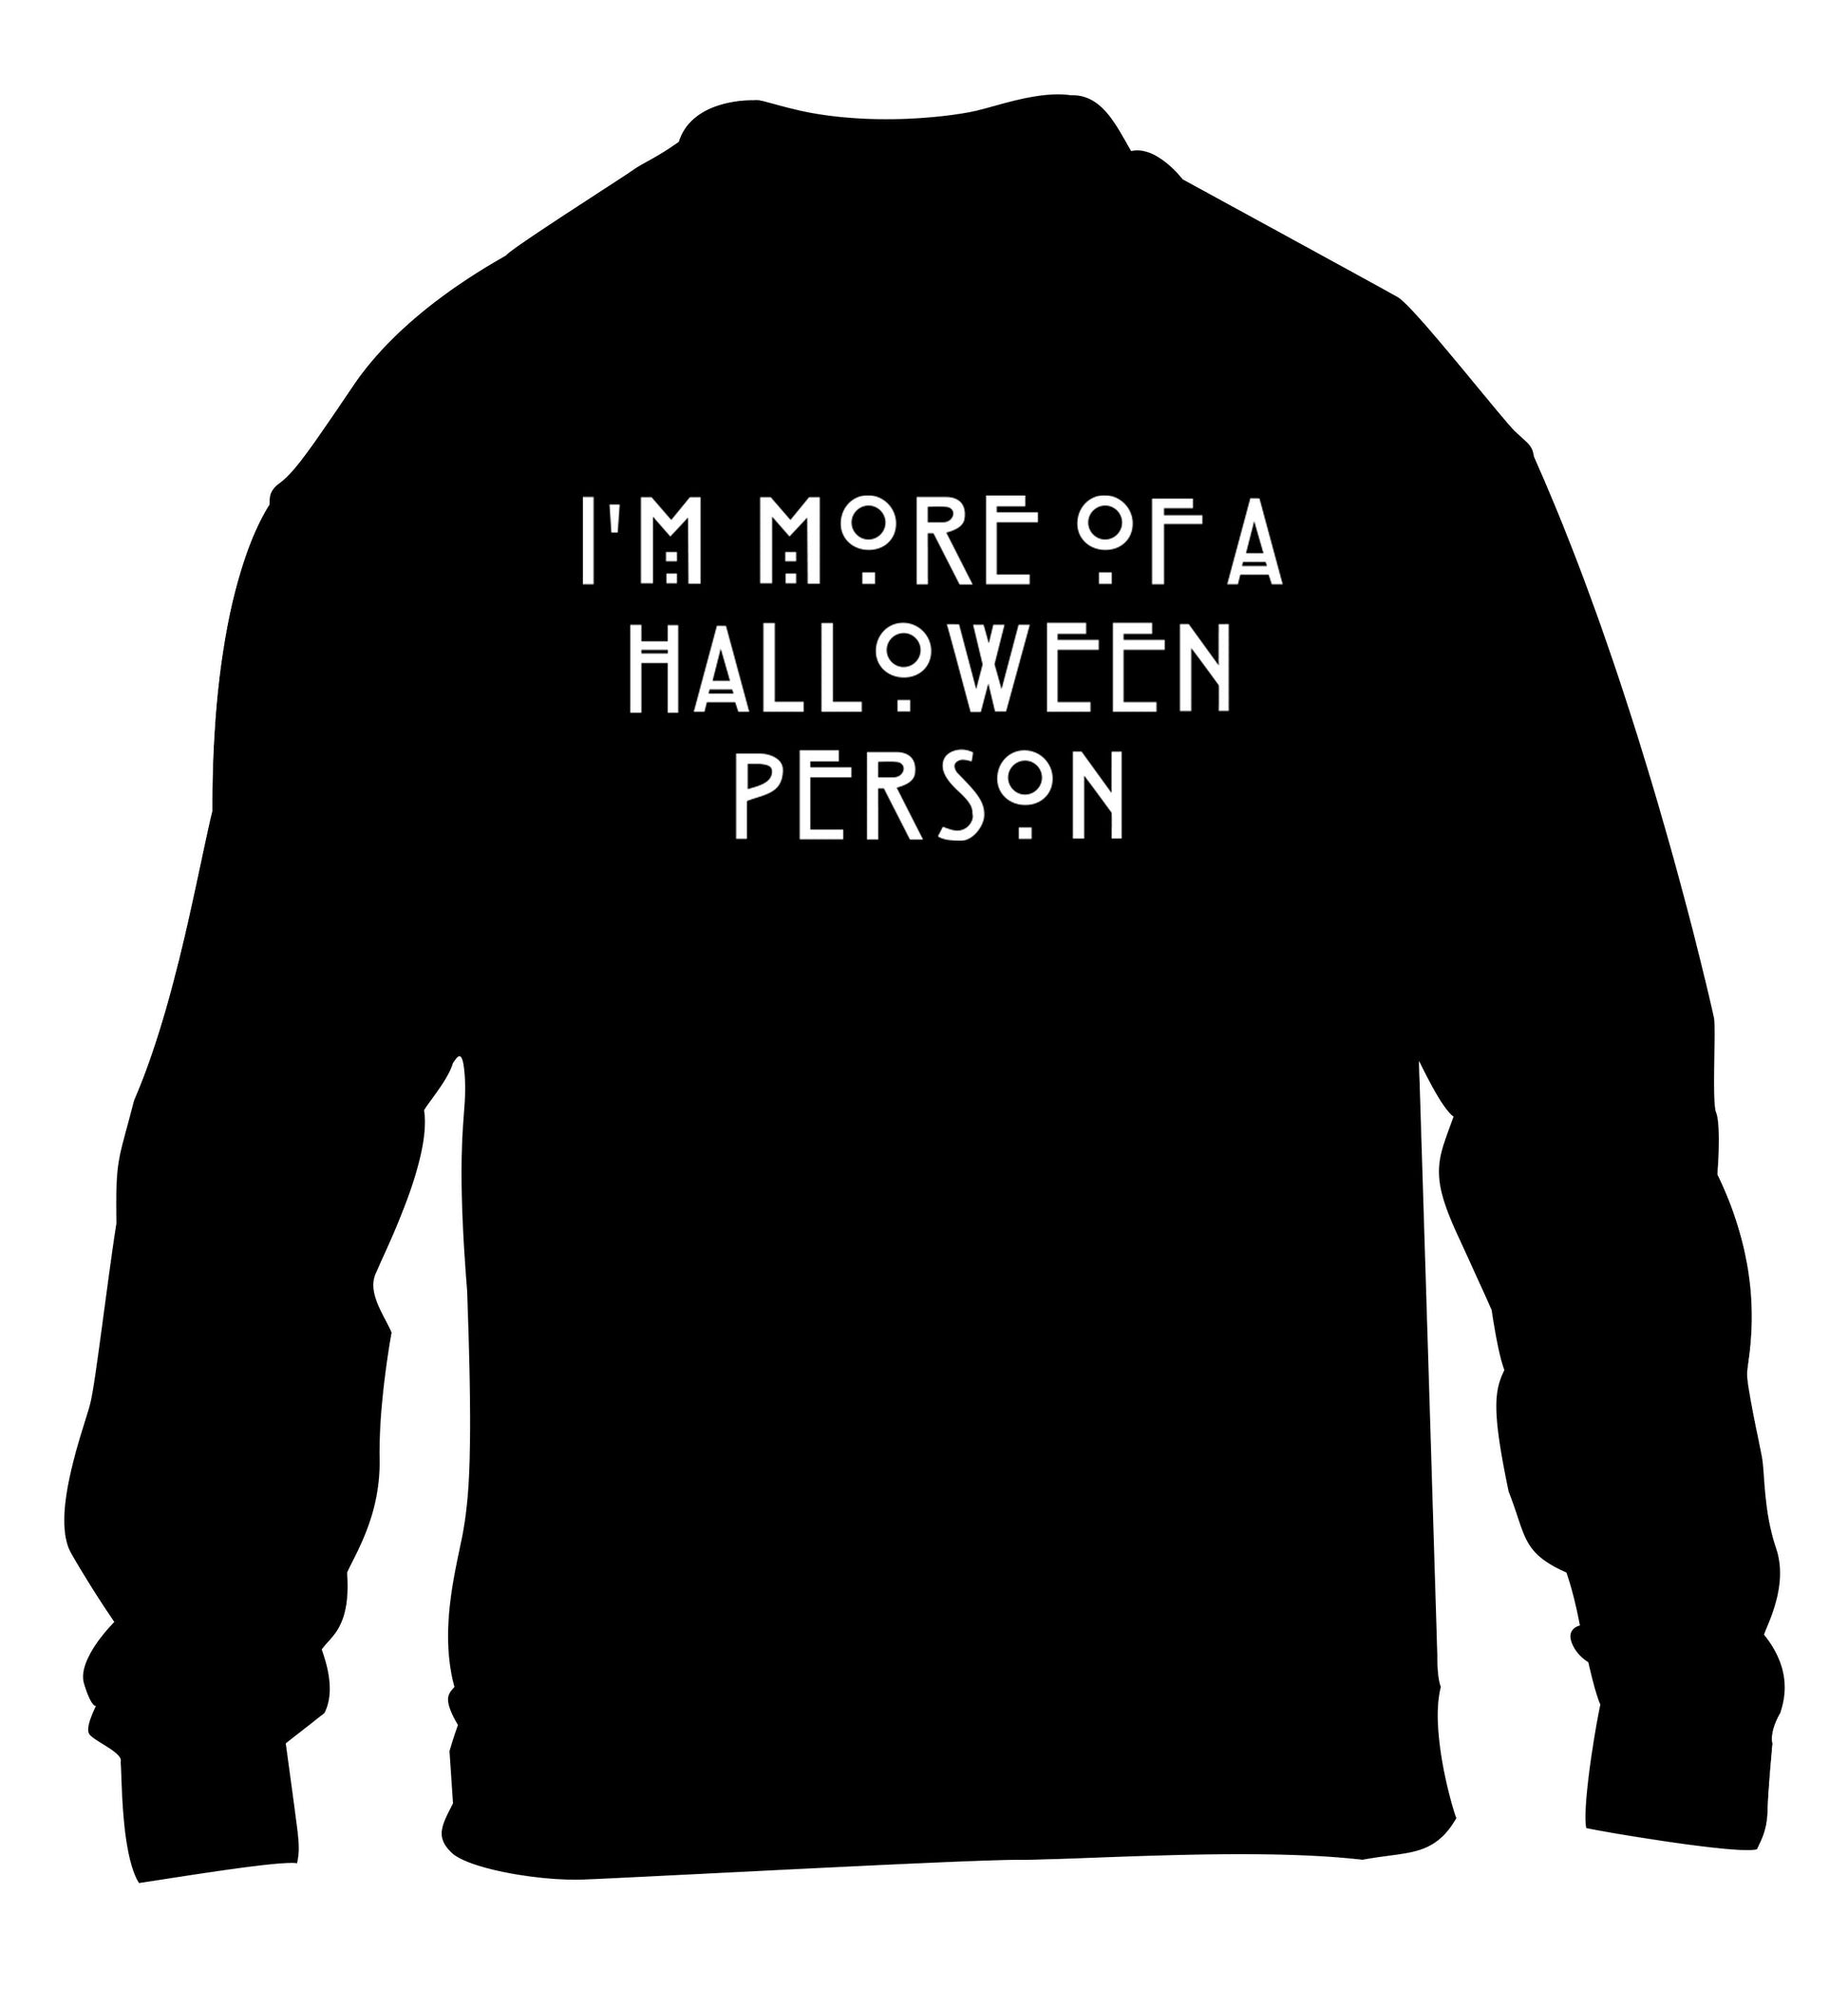 I'm more of a halloween person children's black sweater 12-14 Years